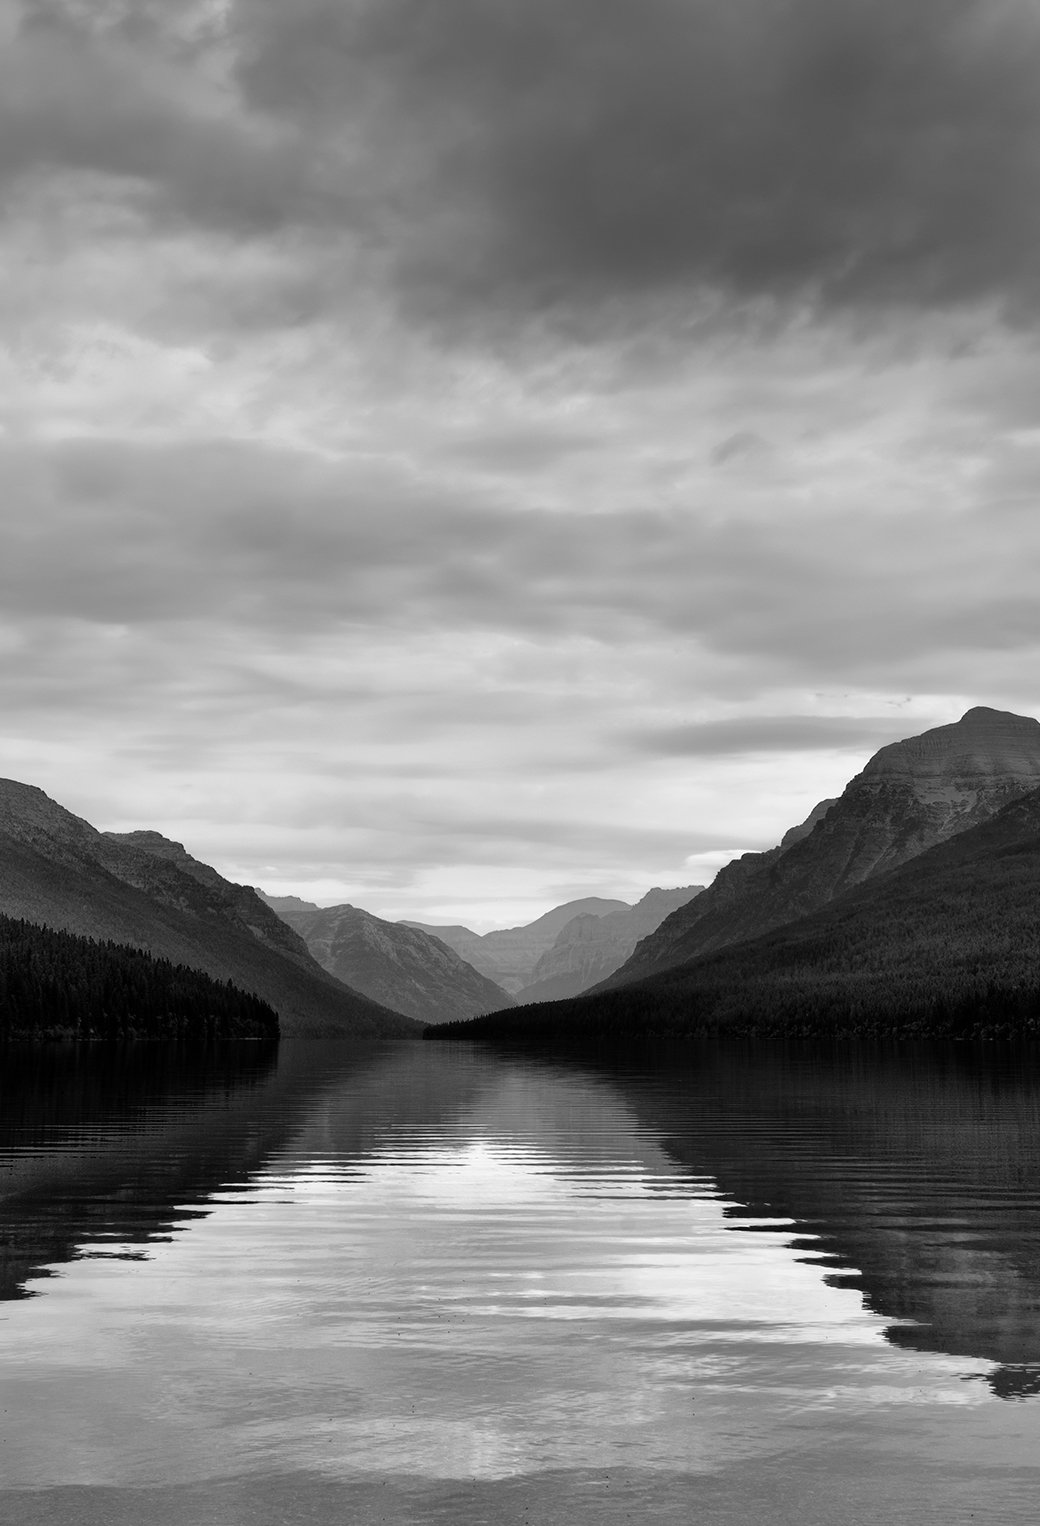 Bowman Lake and a Mountain View (Black & White) Wallpaper for iPhone Pro Max, X, 6